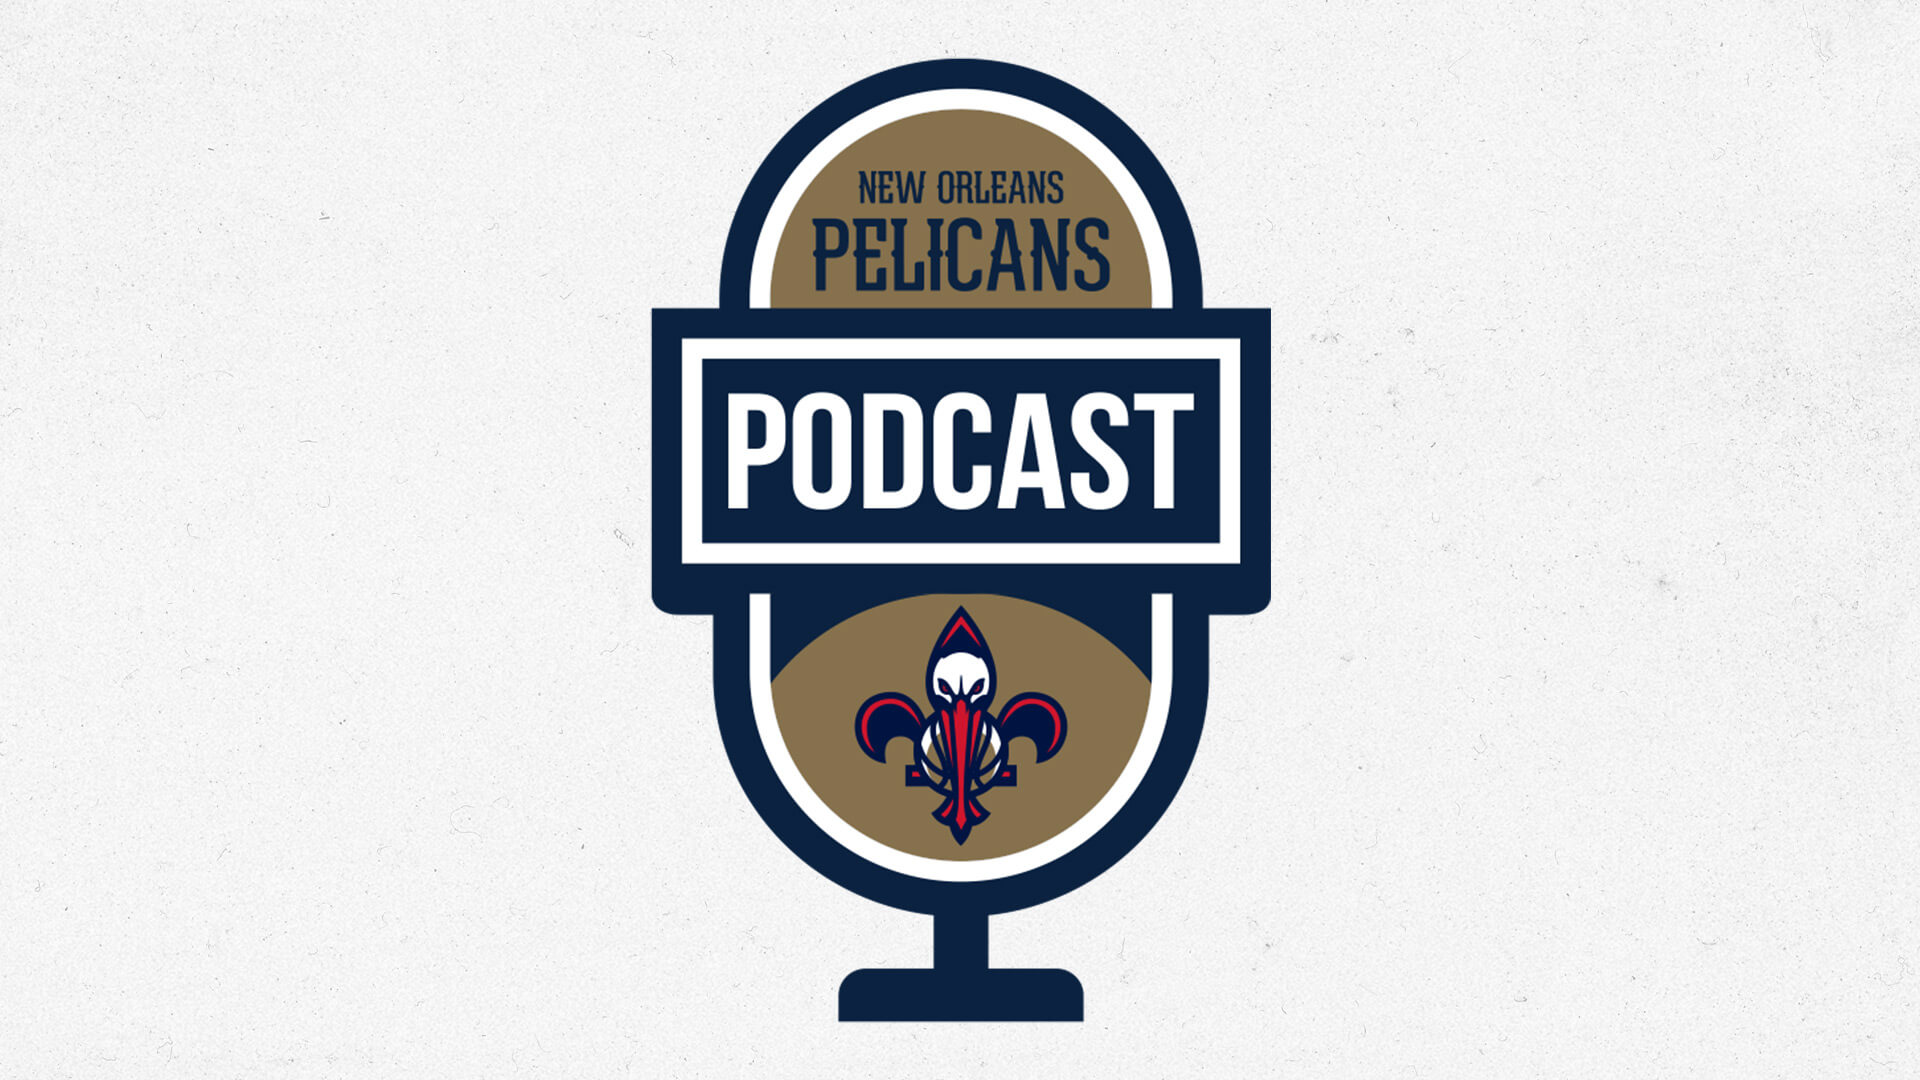 Jace Frederick on the New Orleans Pelicans Podcast presented by SeatGeek - January 11, 2022